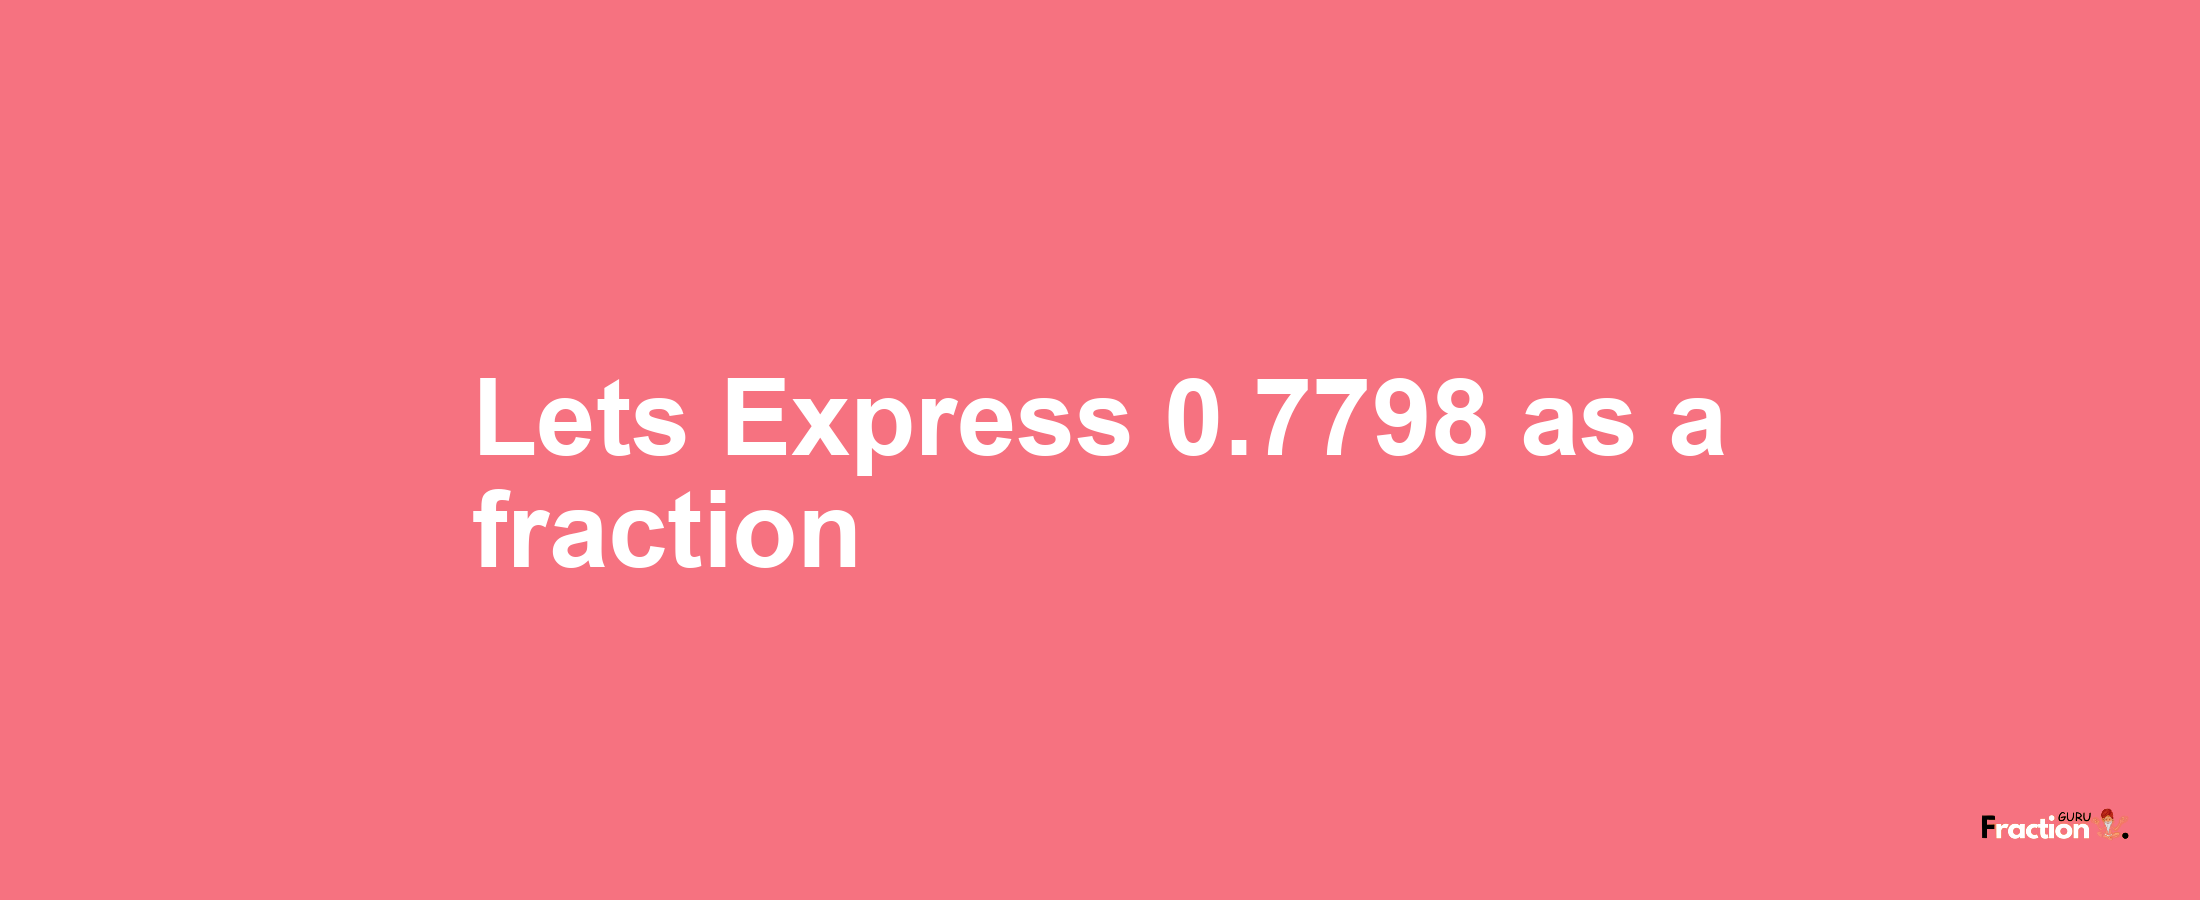 Lets Express 0.7798 as afraction